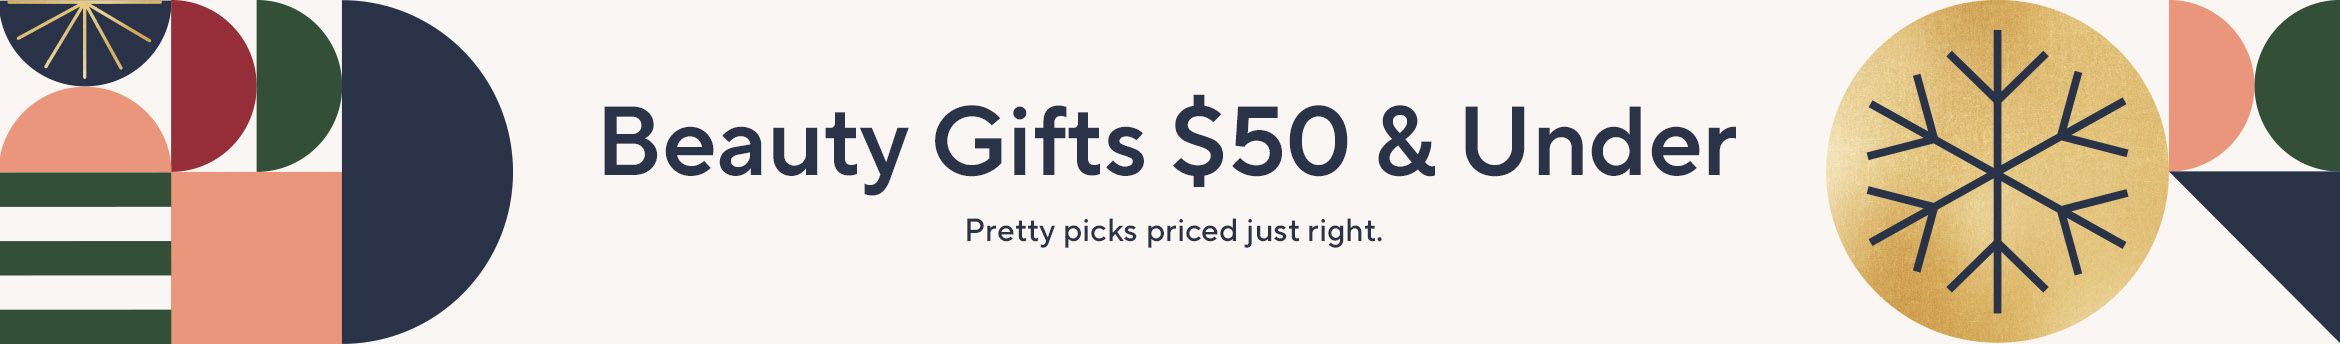 Beauty Gifts $50 & Under - Pretty picks priced just right.